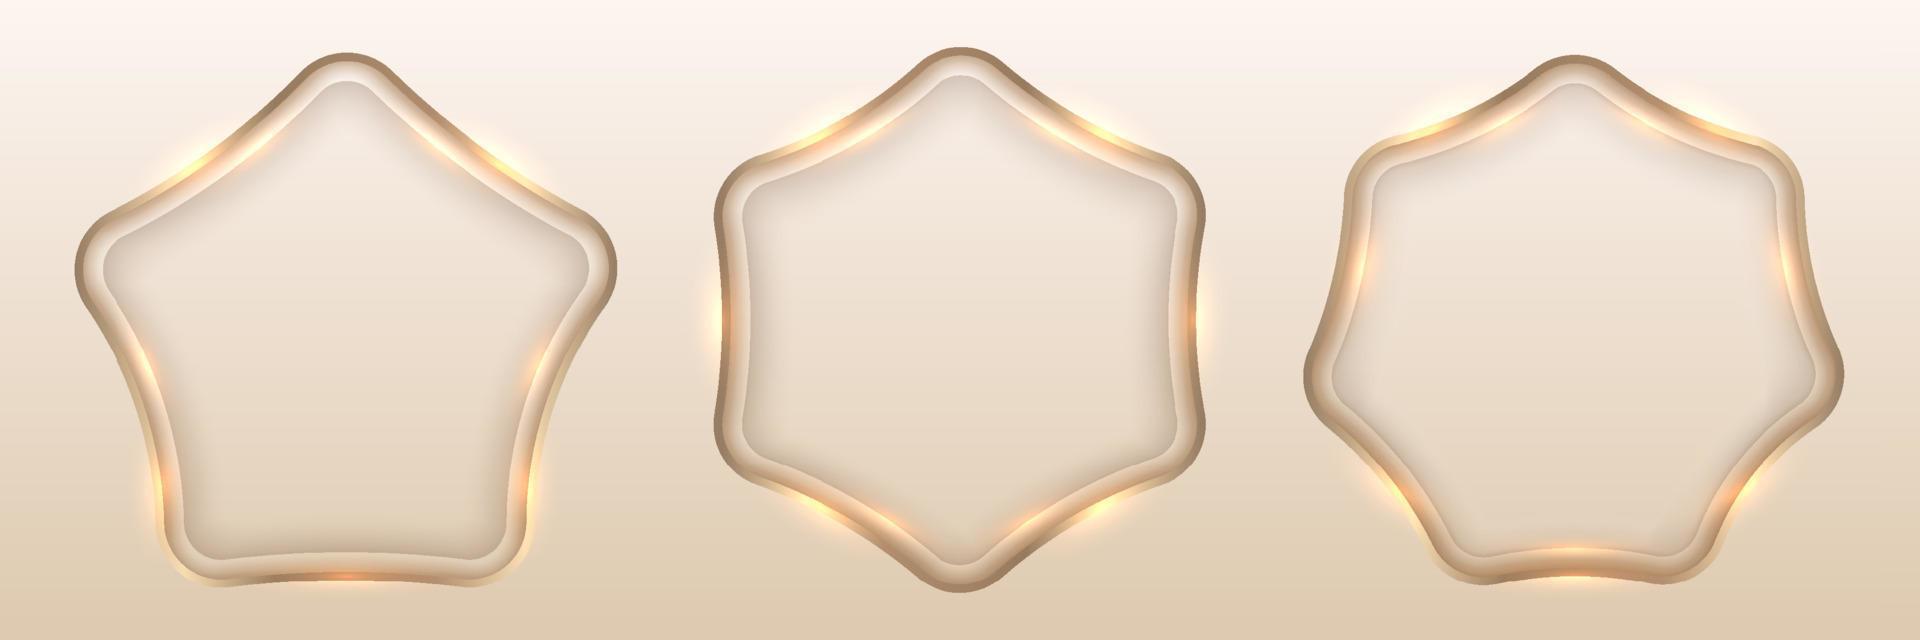 Set of badges golden geometric frames with lighting effect isolated background luxury style vector